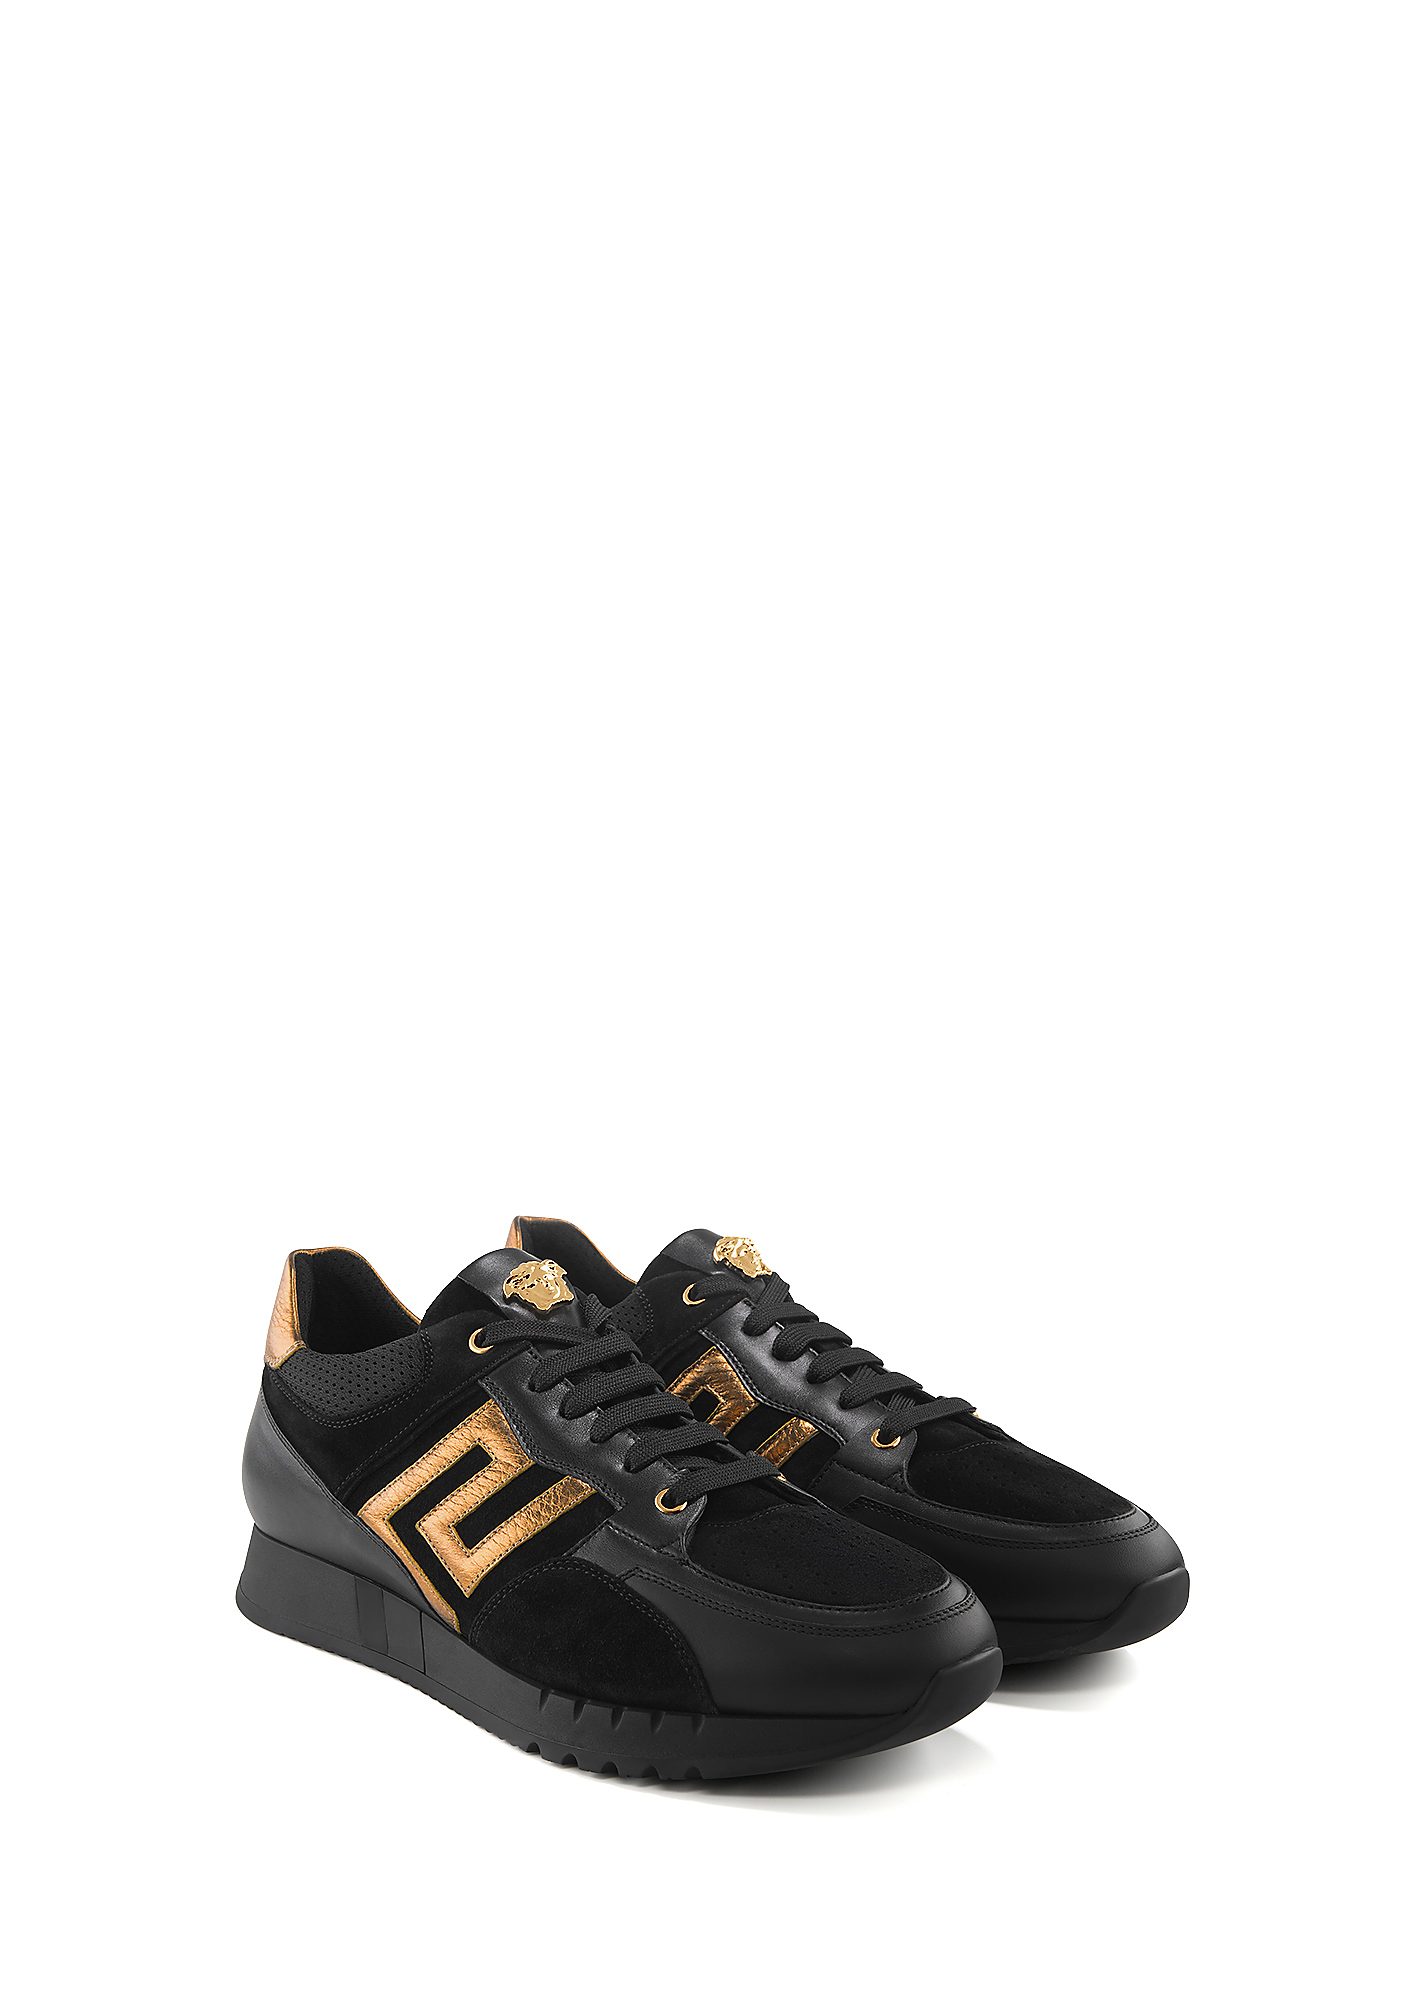 versace black and gold shoes